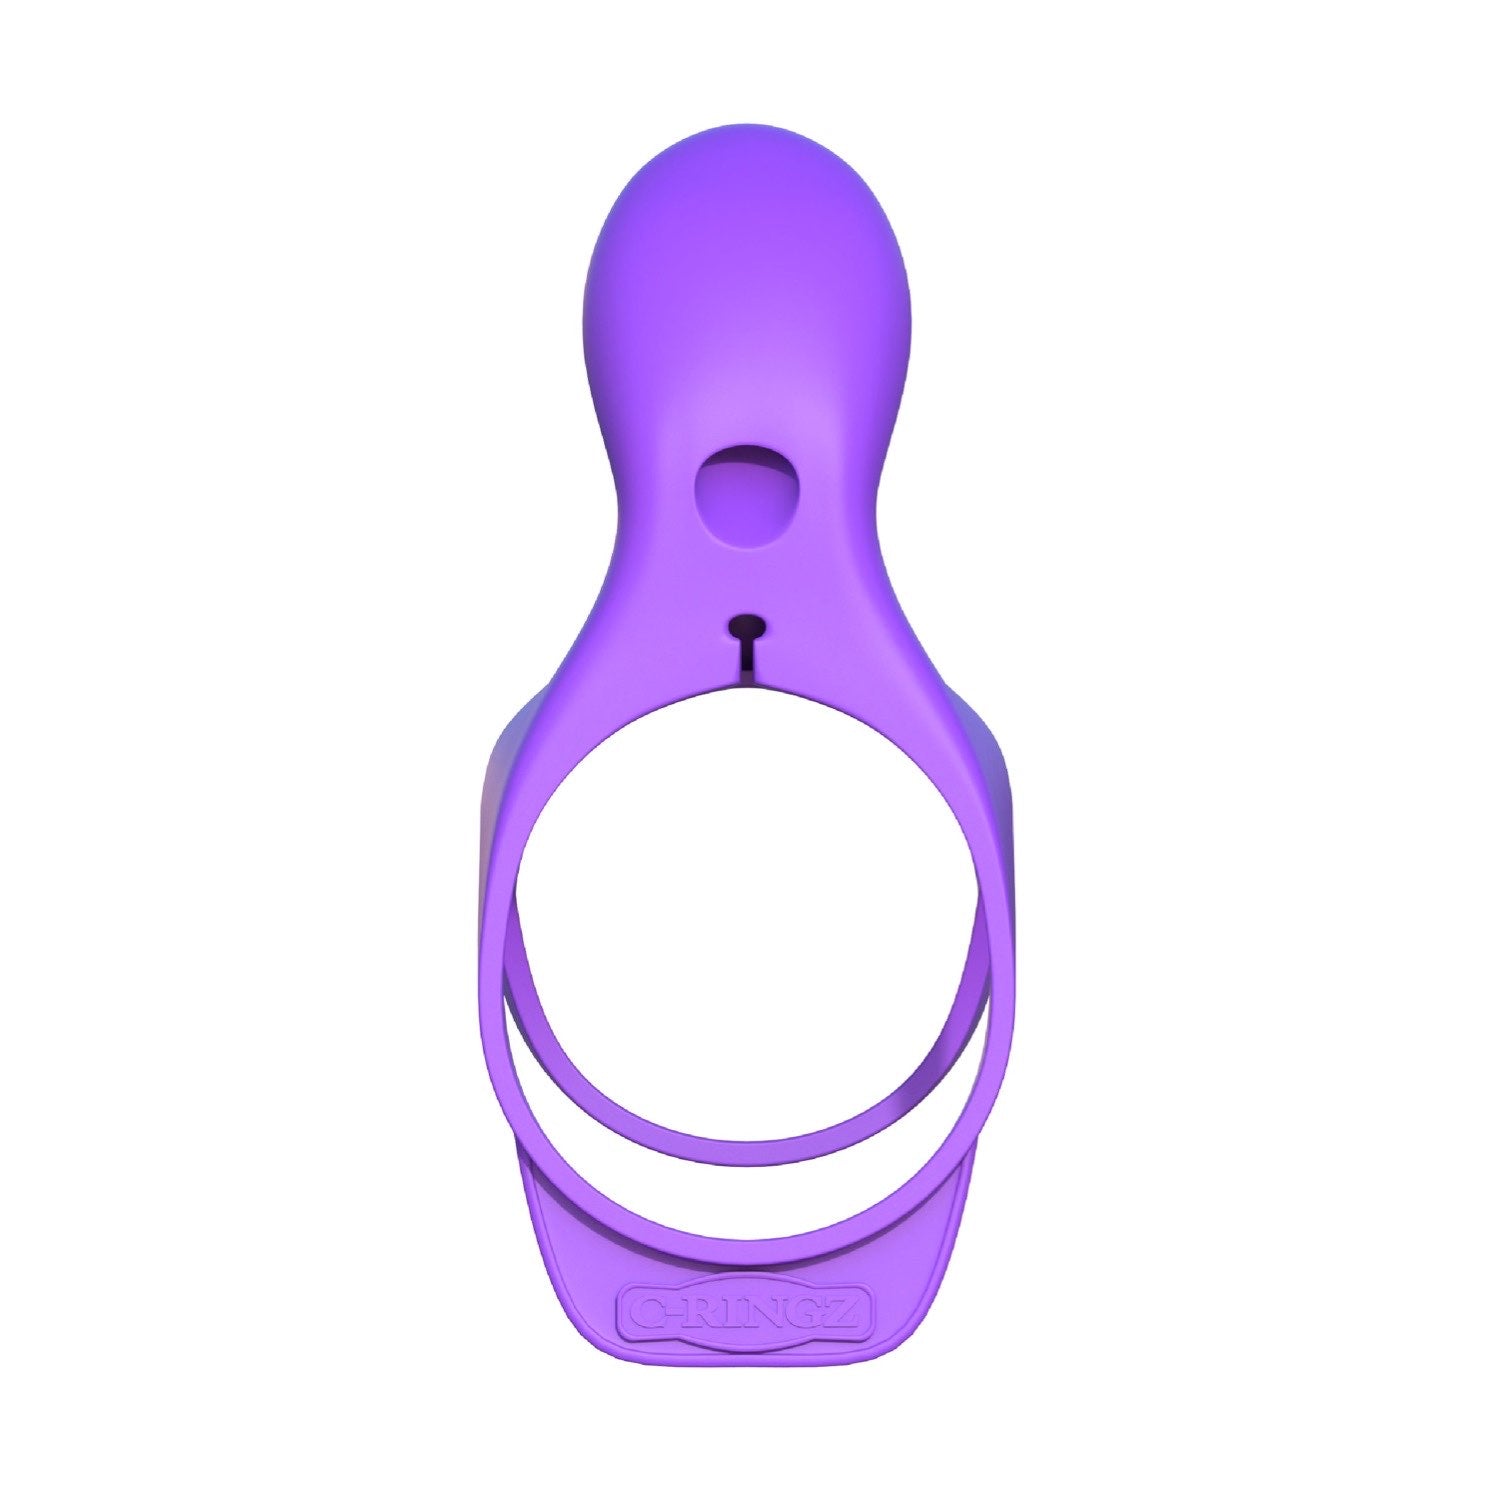 Fantasy C-Ringz Fantasy C-ringz Ultimate Couples Cage - Purple Dual Vibrating Penis Cage by Pipedream